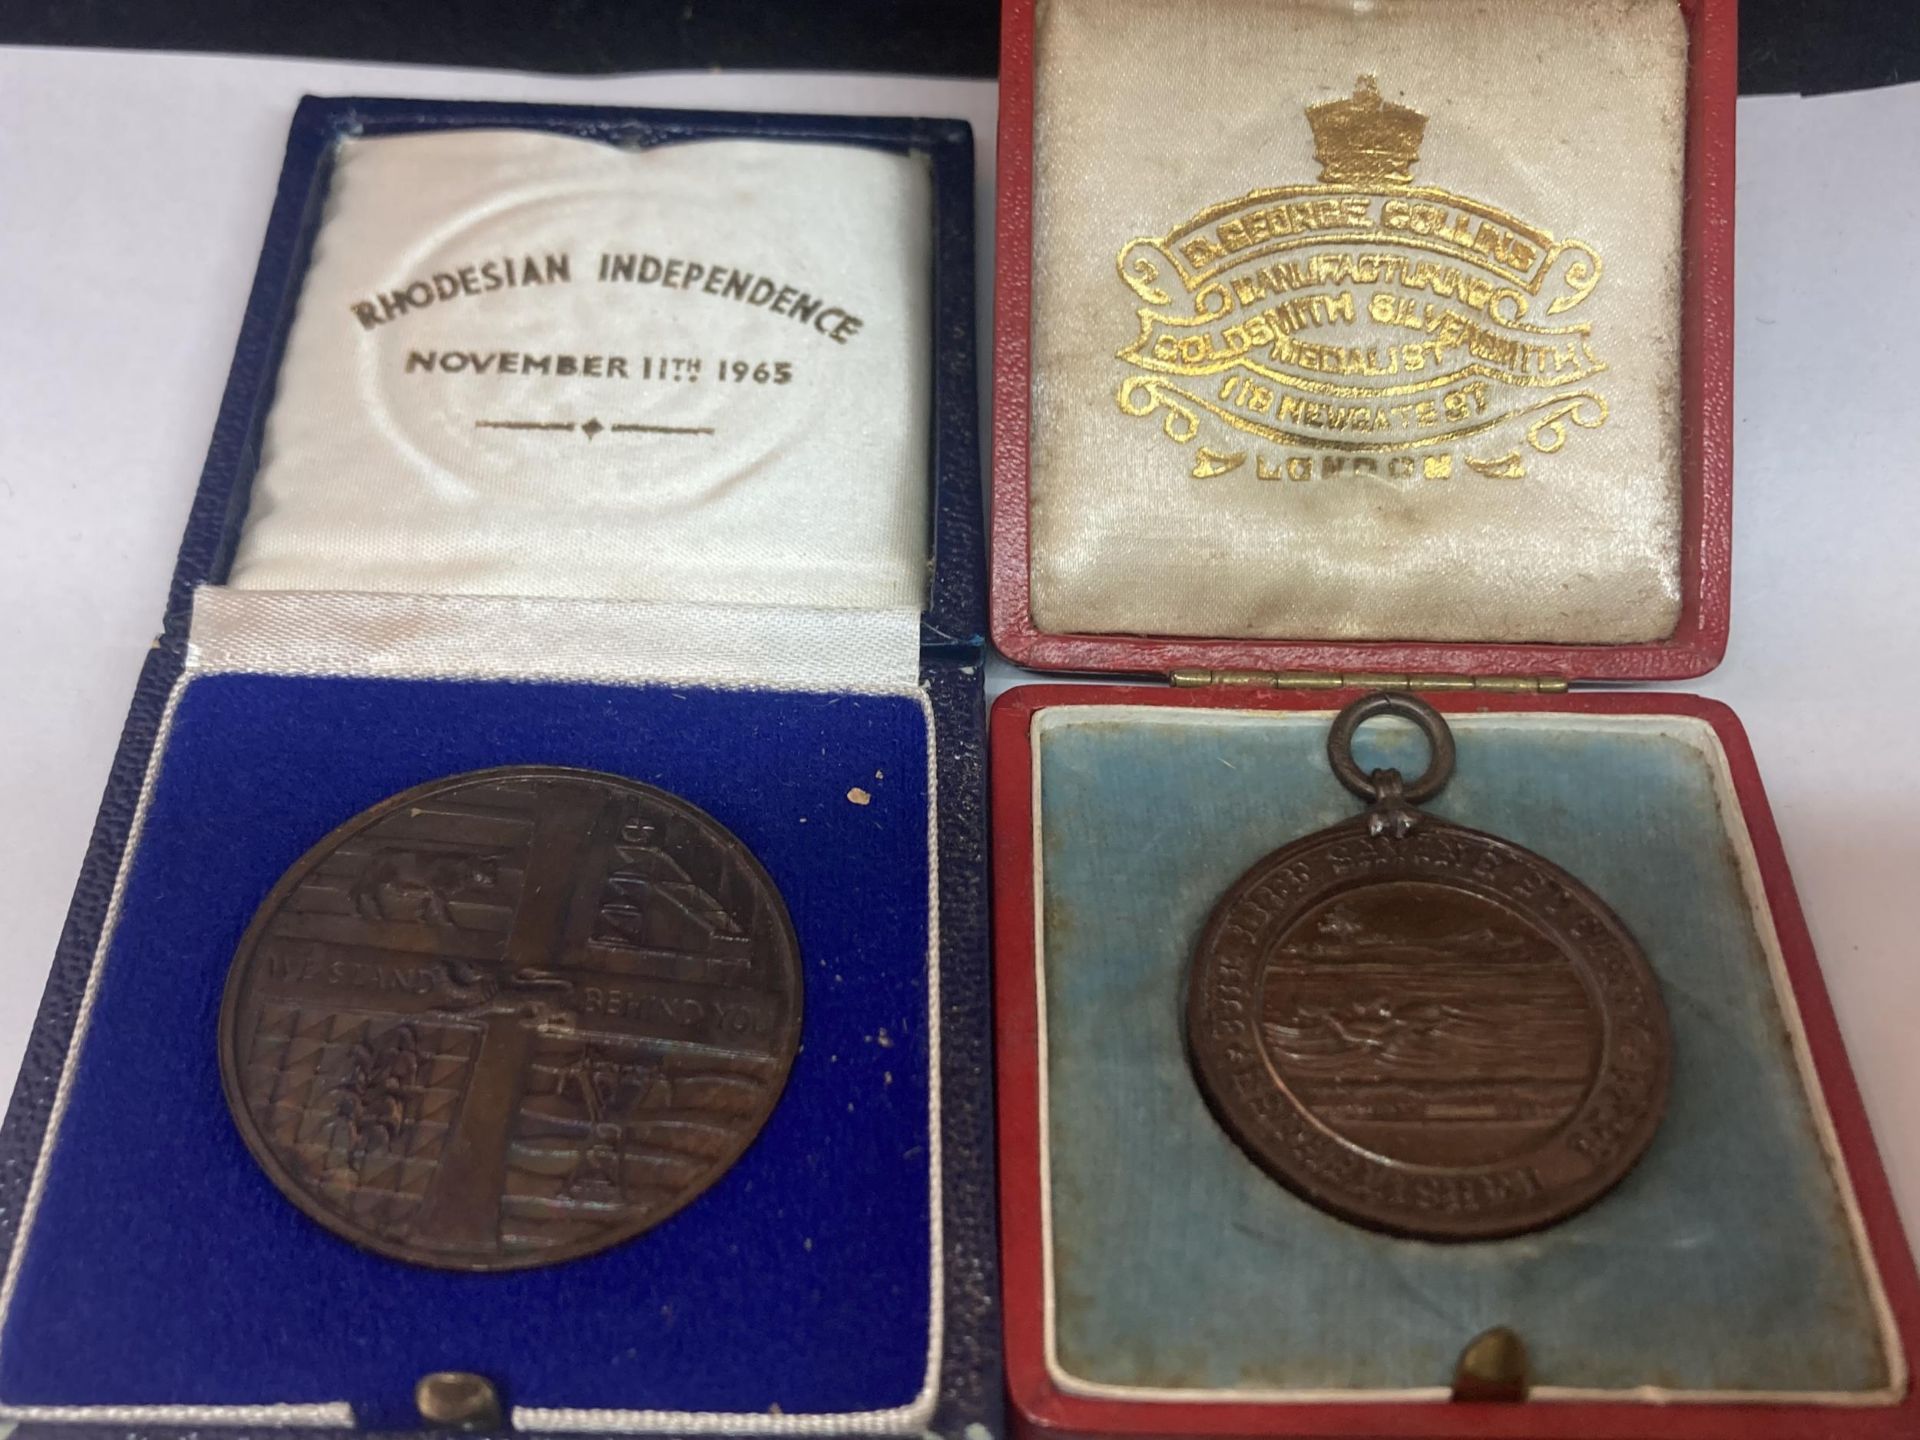 FOUR COMMEMORATIVE MEDALS, TO INCLUDE RHODESIAN INDEPENDANCE, PHOTOGRAPHY ETC - Image 2 of 5